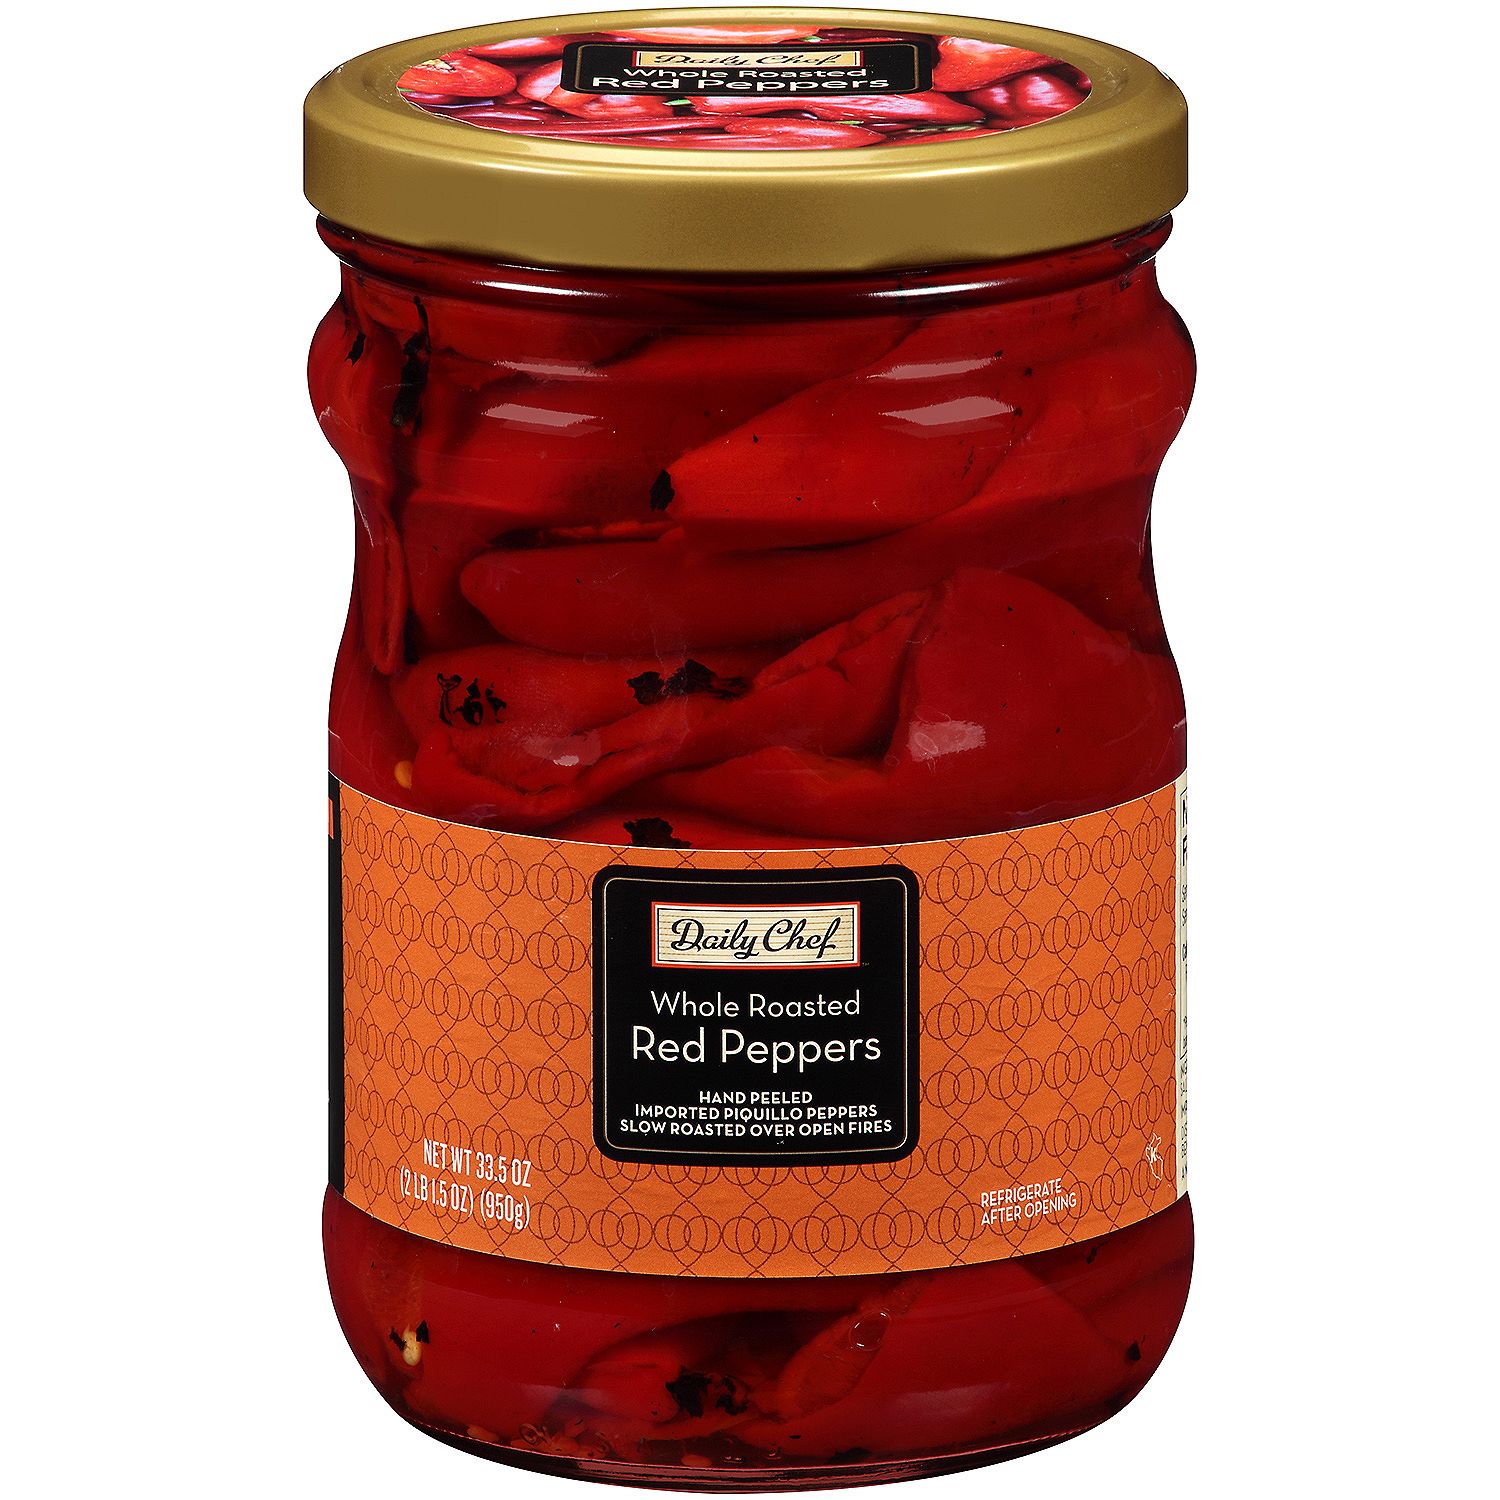 (6 Pack) Daily Chef Whole Roasted Red Peppers - 33.5 Oz.